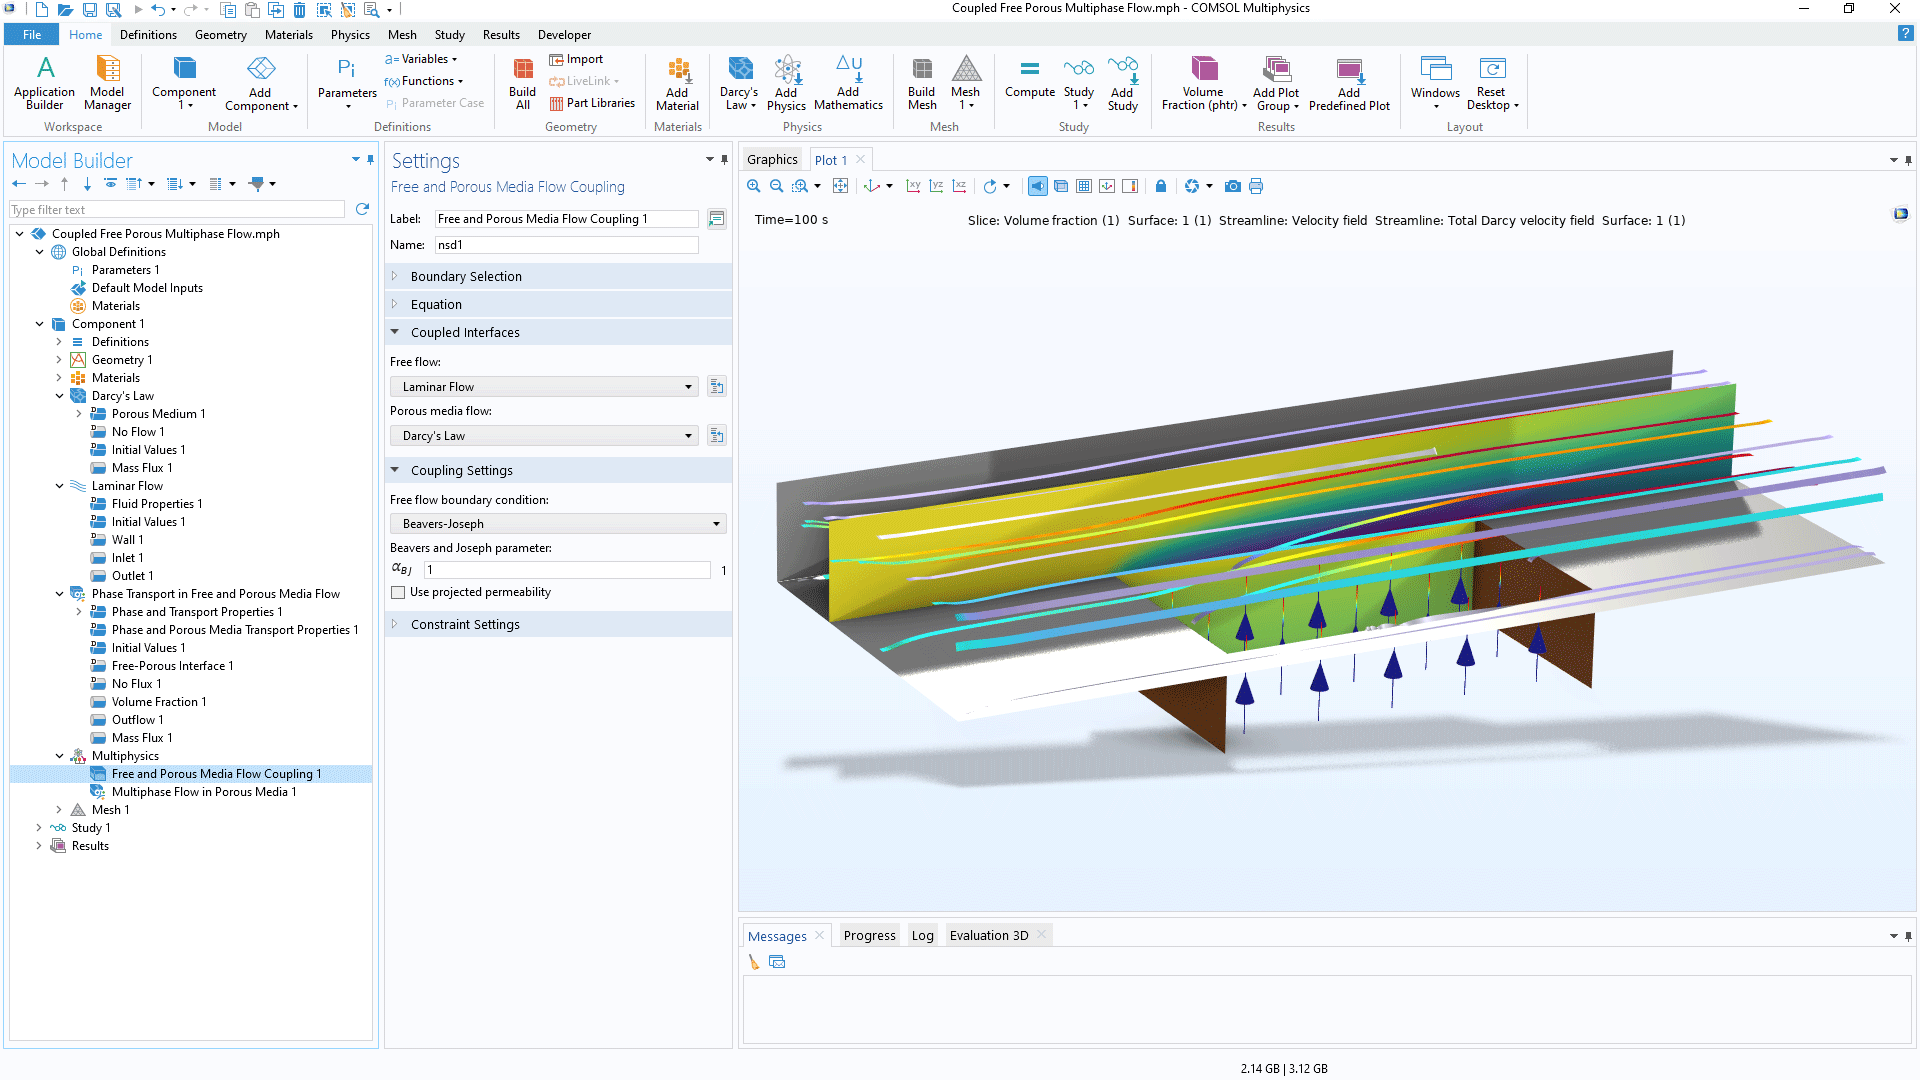 The COMSOL Multiphysics UI showing the Free and Porous Media Flow Coupling multiphysics coupling node highlighted, the corresponding Settings window, and a multiphase channel flow model in the Graphics window.